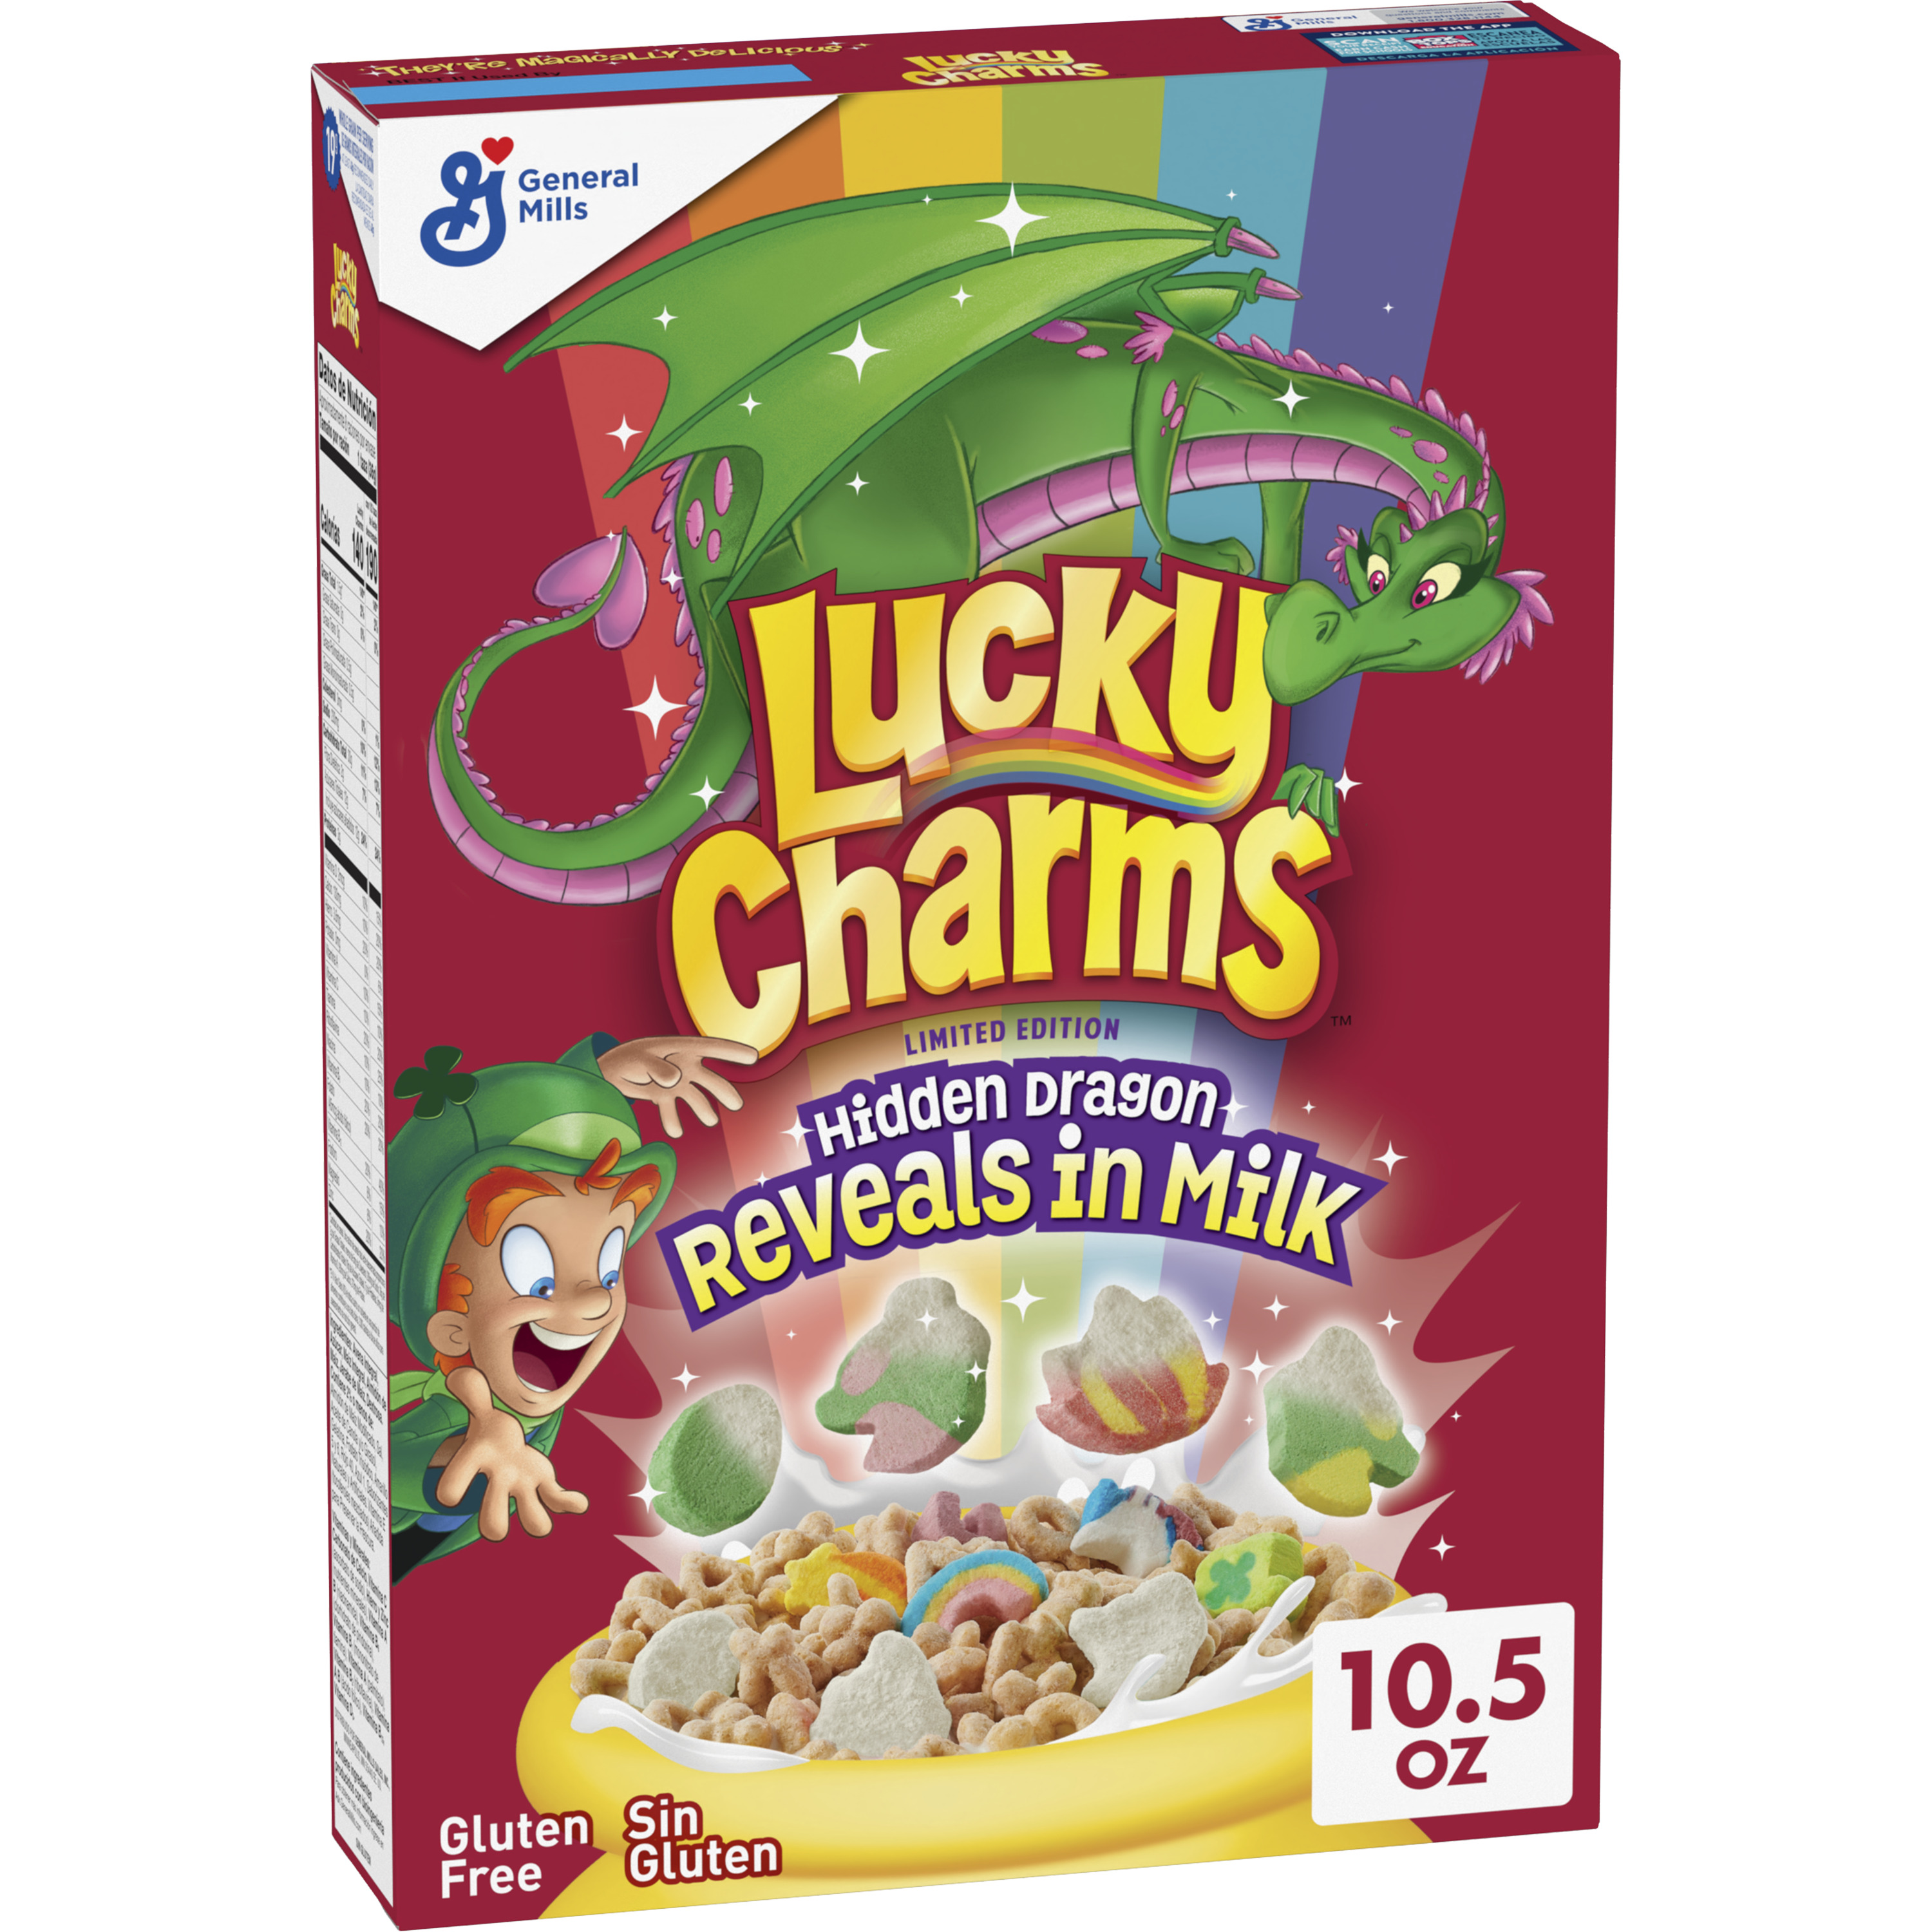 The New Lucky Charms Clusters Cereal Is Filled With Even More Marshmallow  Than Usual